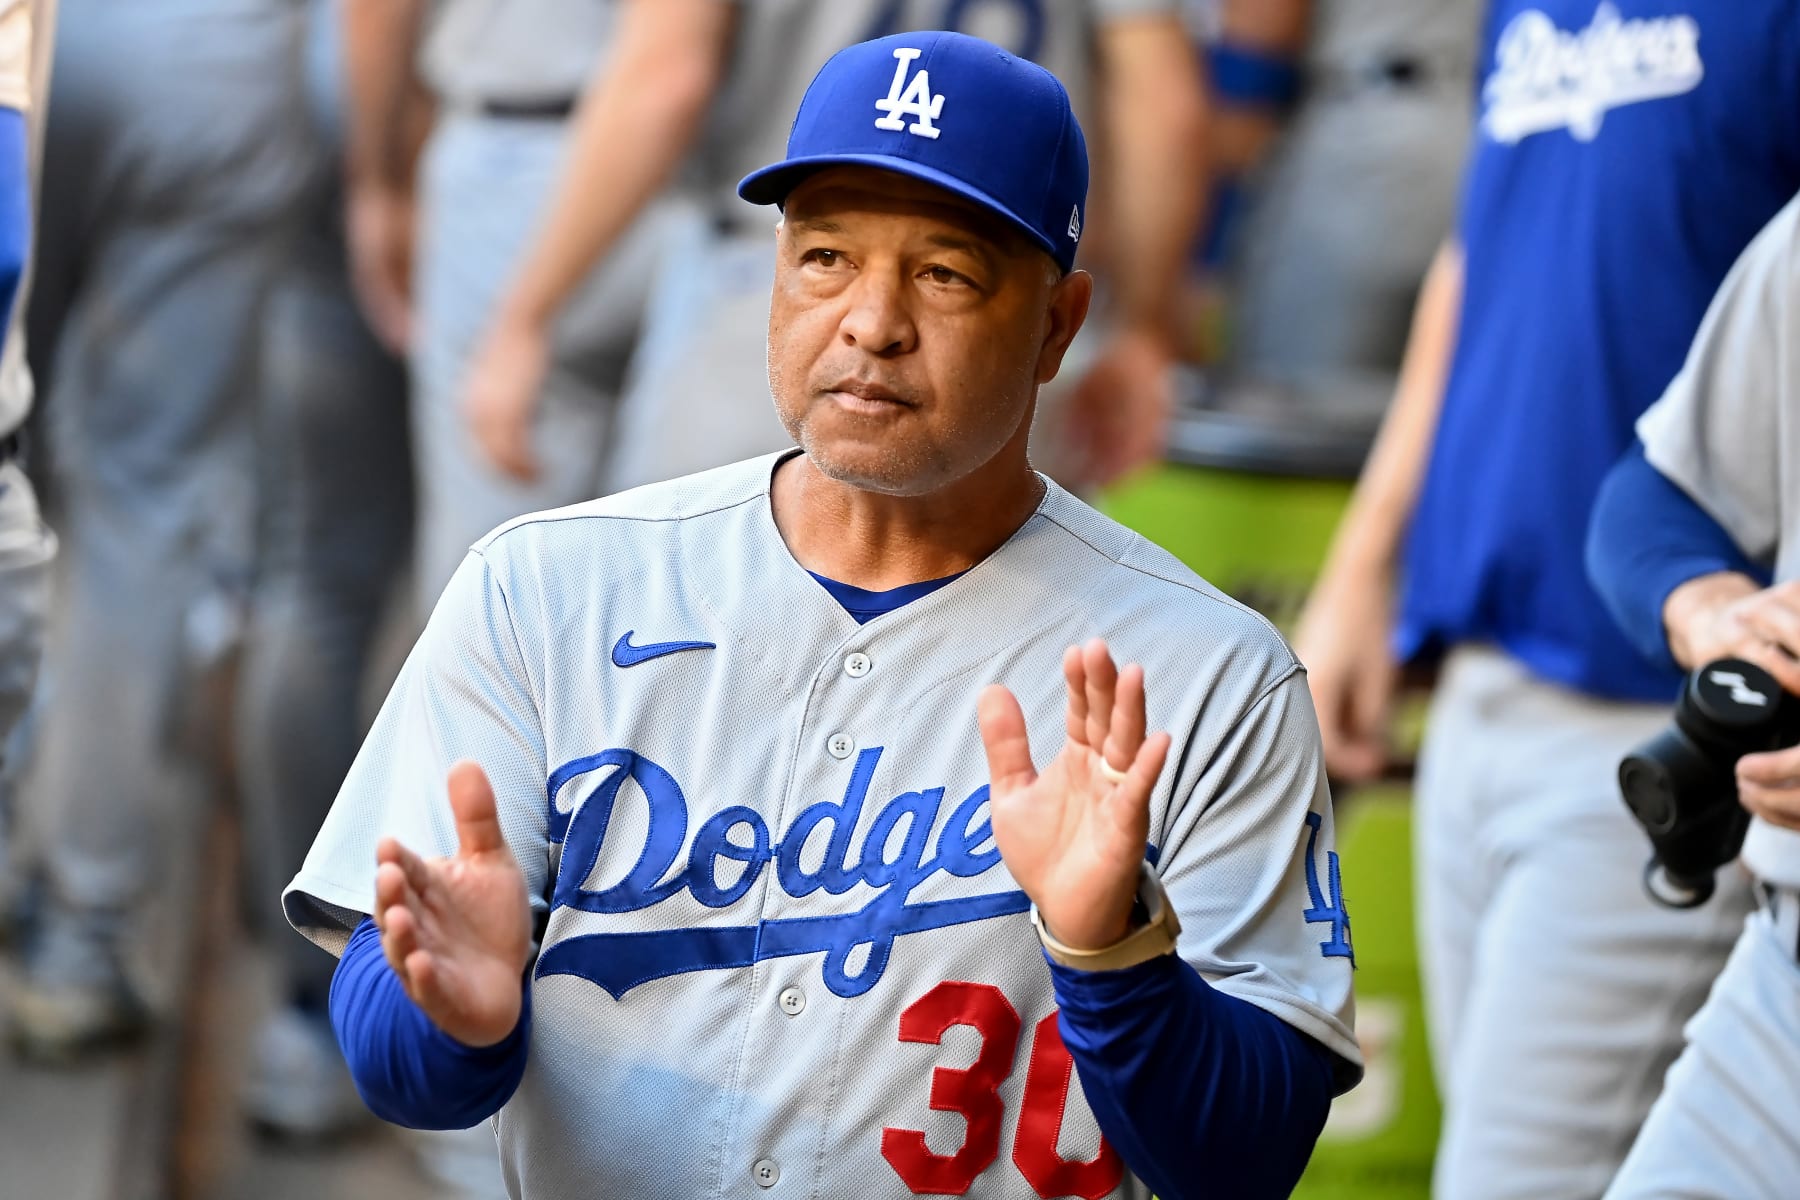 MLB awards races: Will Dodgers' manager Dave Roberts again be